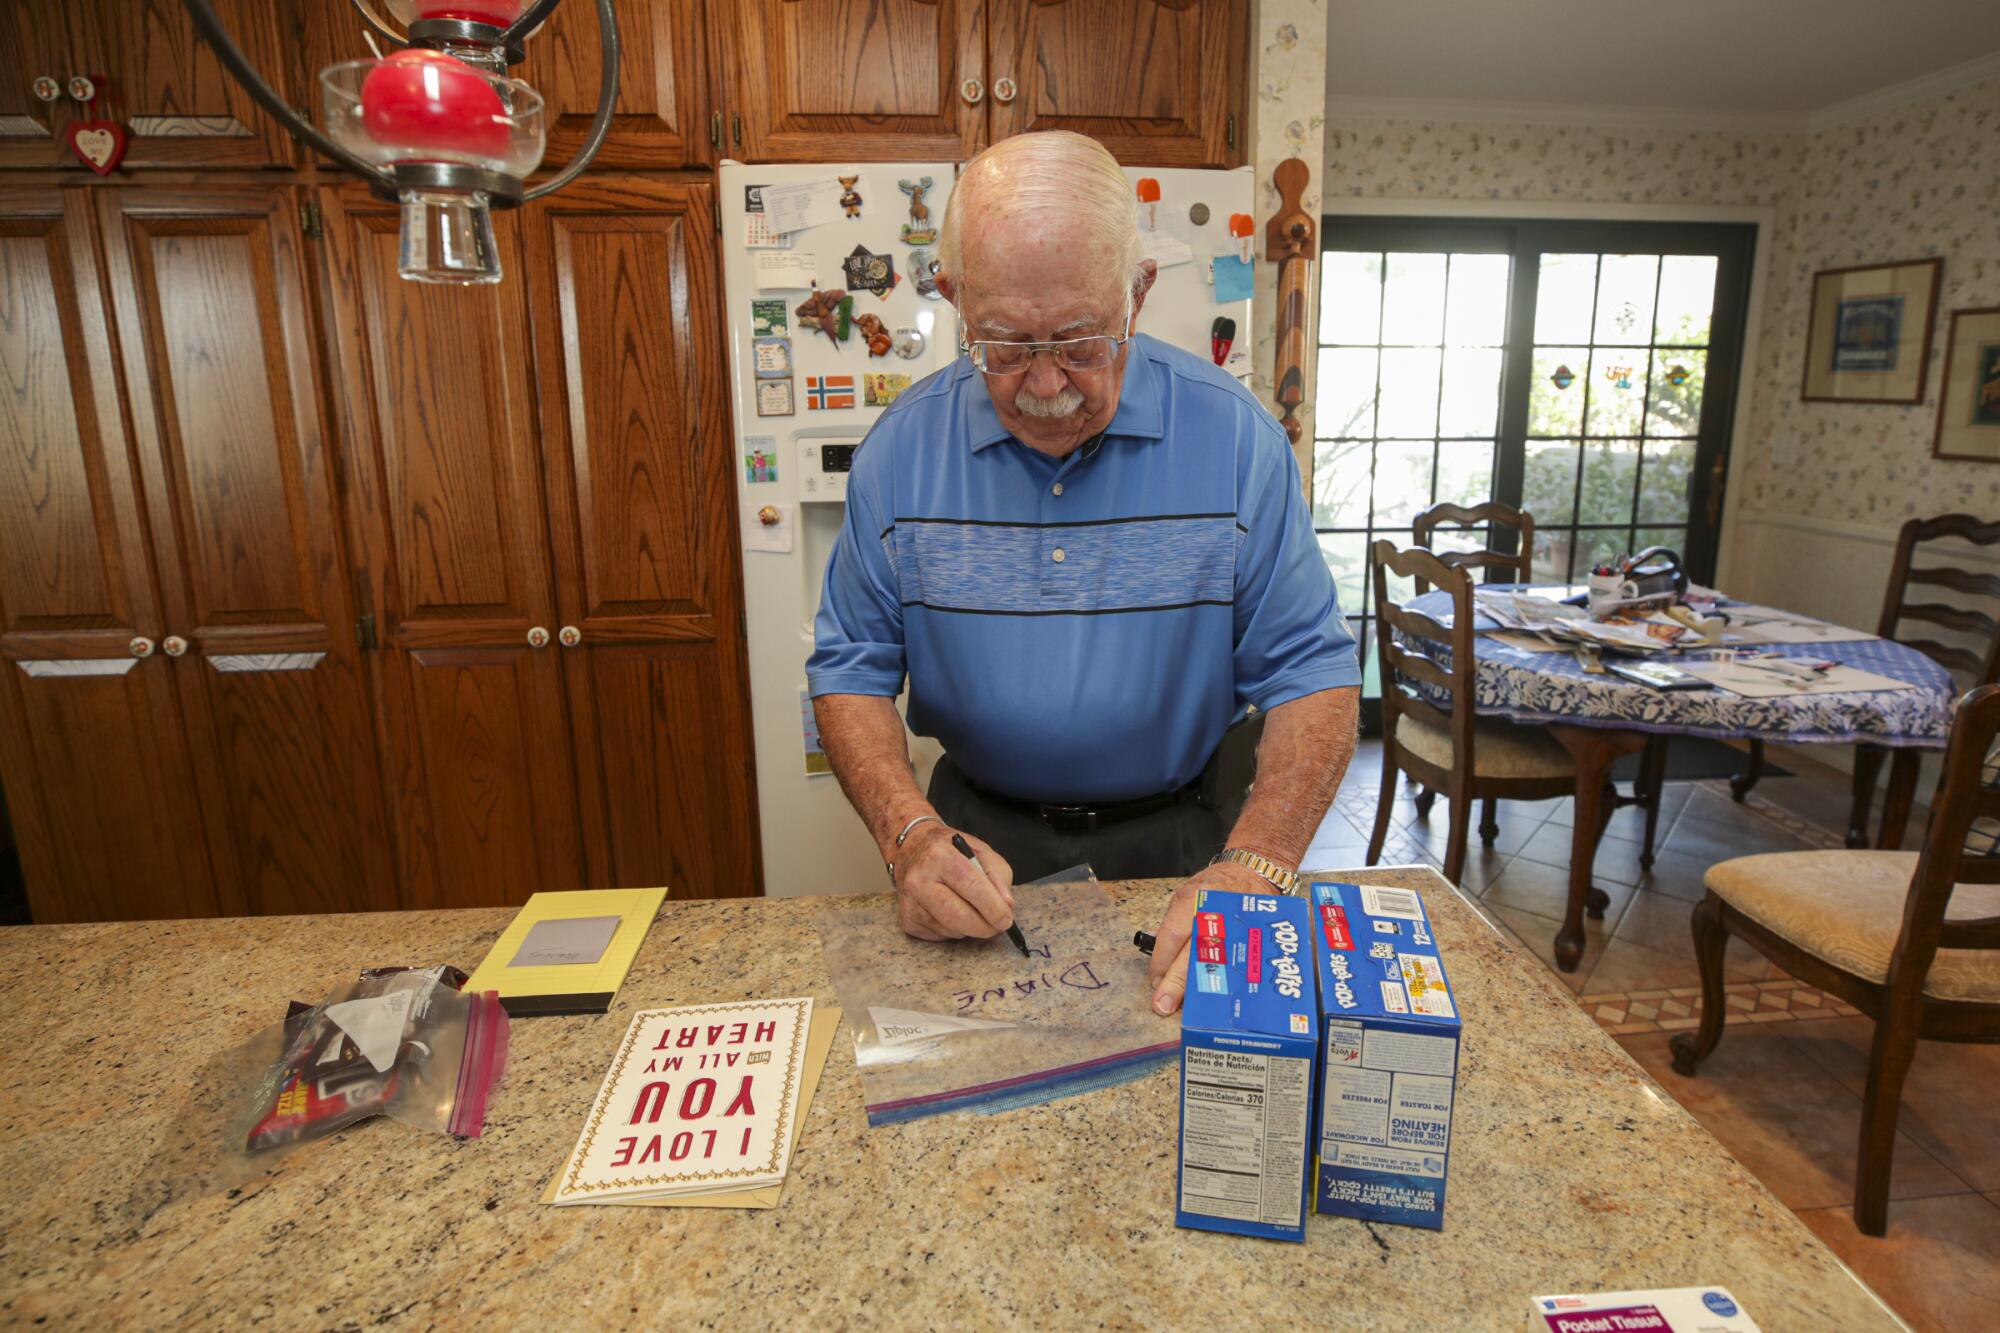 A man writes the name Diane on a Ziploc bag next to a Valentine's card and boxes of Pop-Tarts